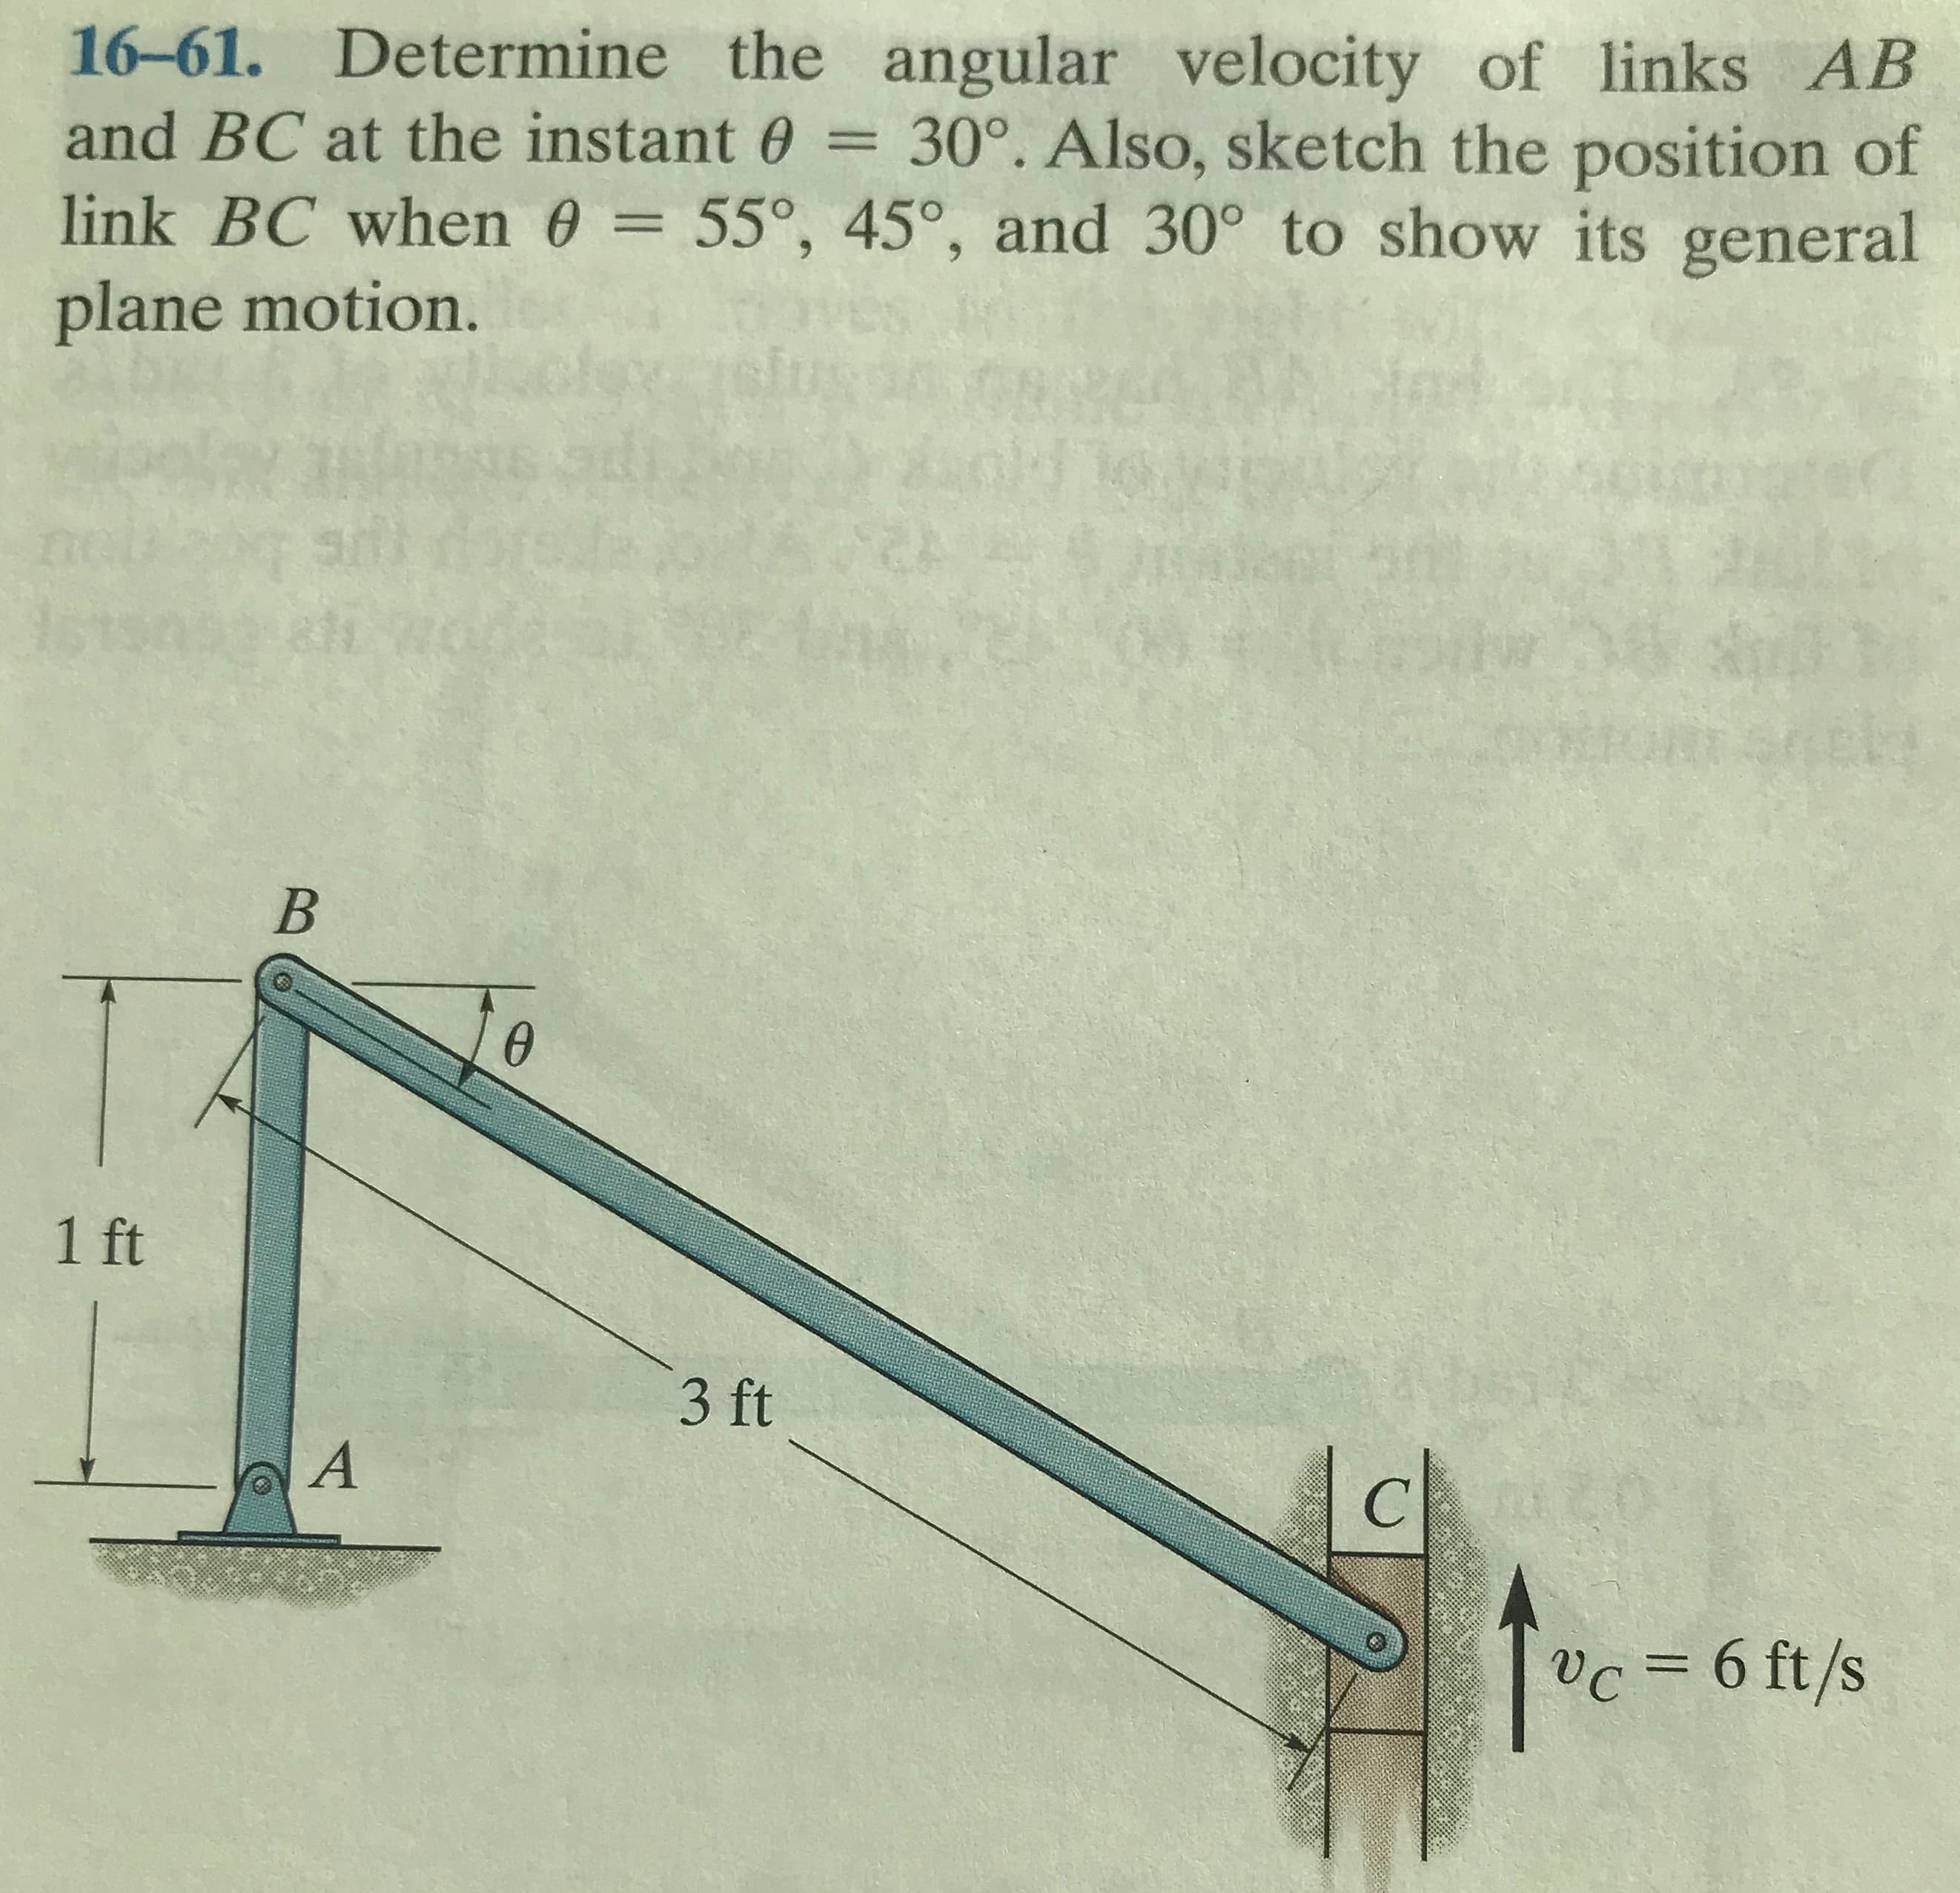 16-61. Determine the angular velocity of links AB
and BC at the instant 0 = 30°. Also, sketch the position of
link BC when 0 = 55°, 45°, and 30° to show its general
plane motion.
6.
1 ft
3 ft
vc = 6 ft/s
